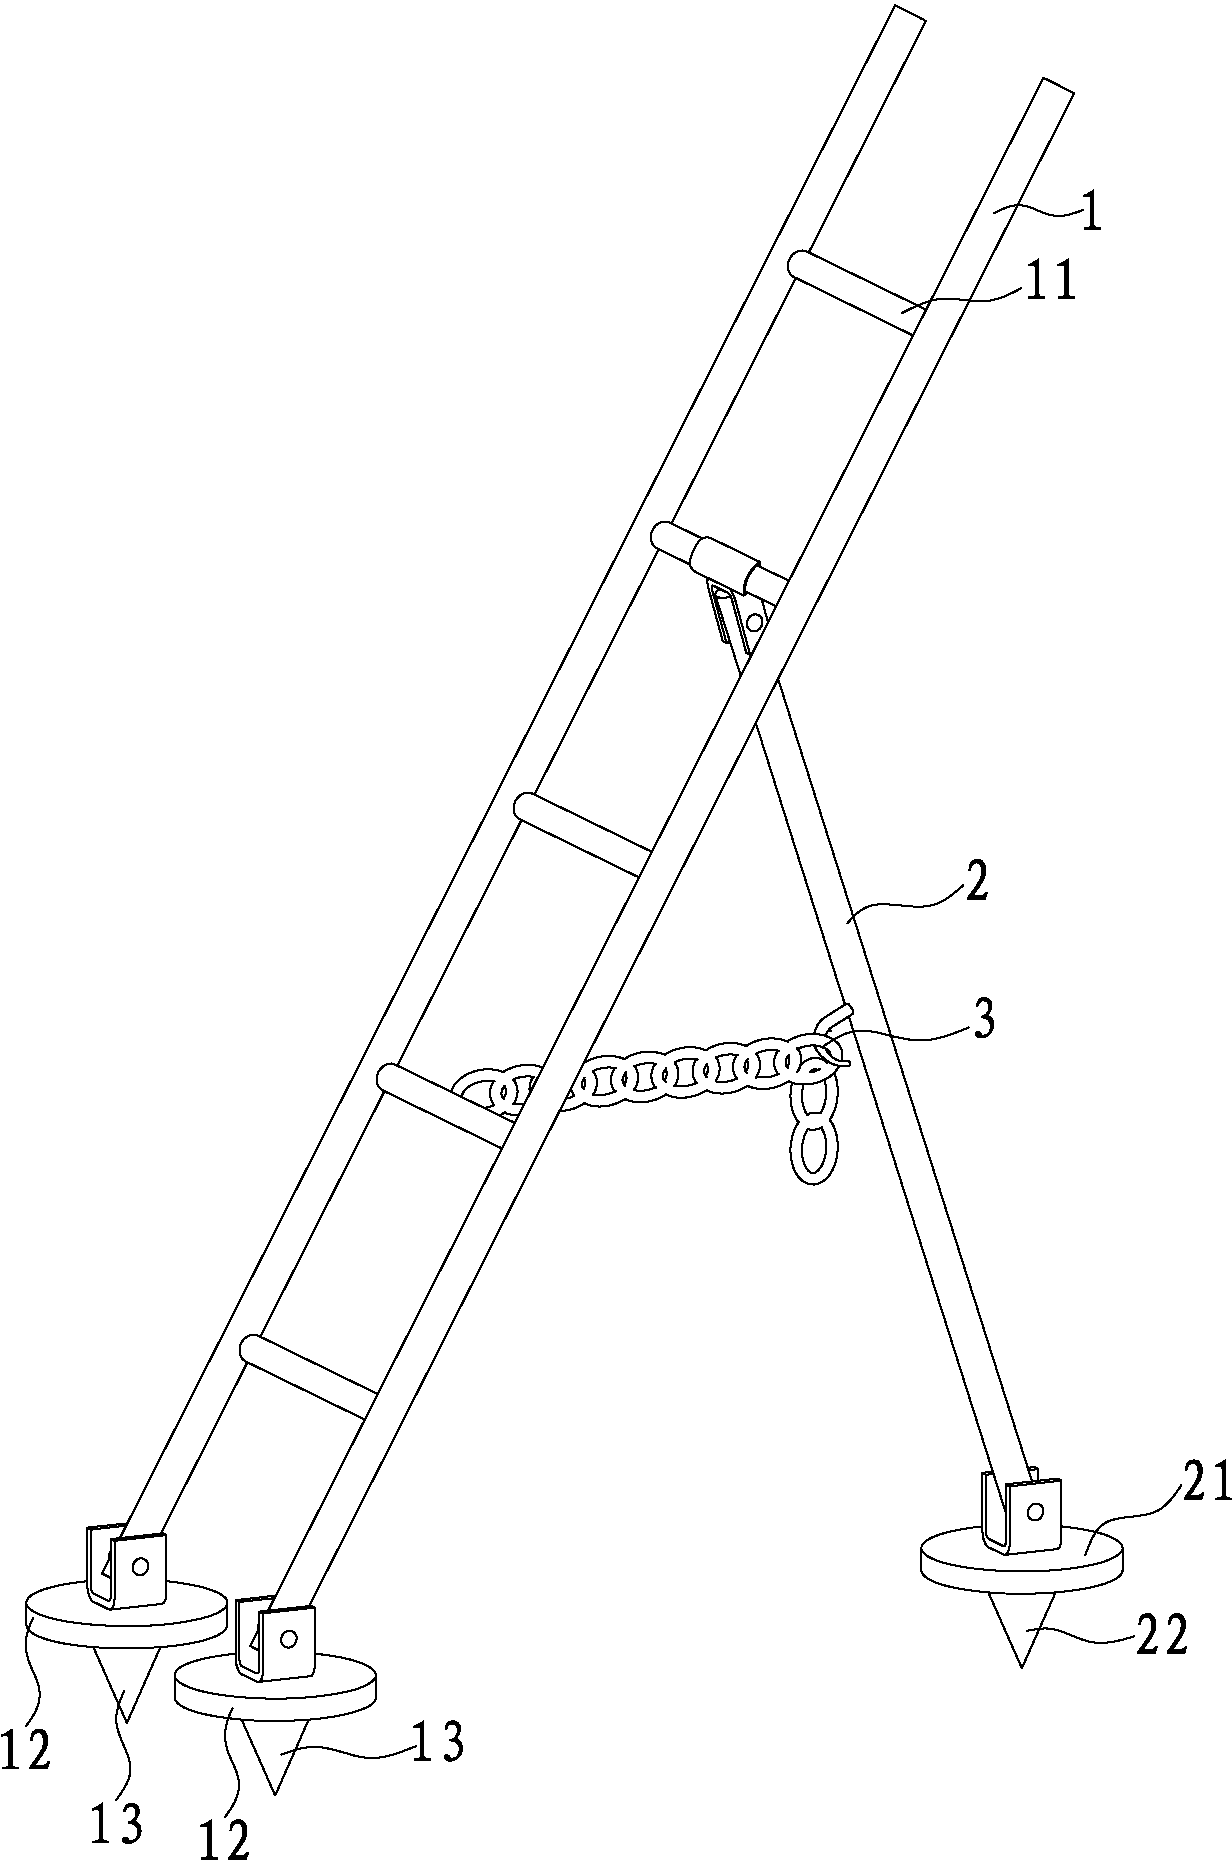 Special ladder for quickly picking fruits